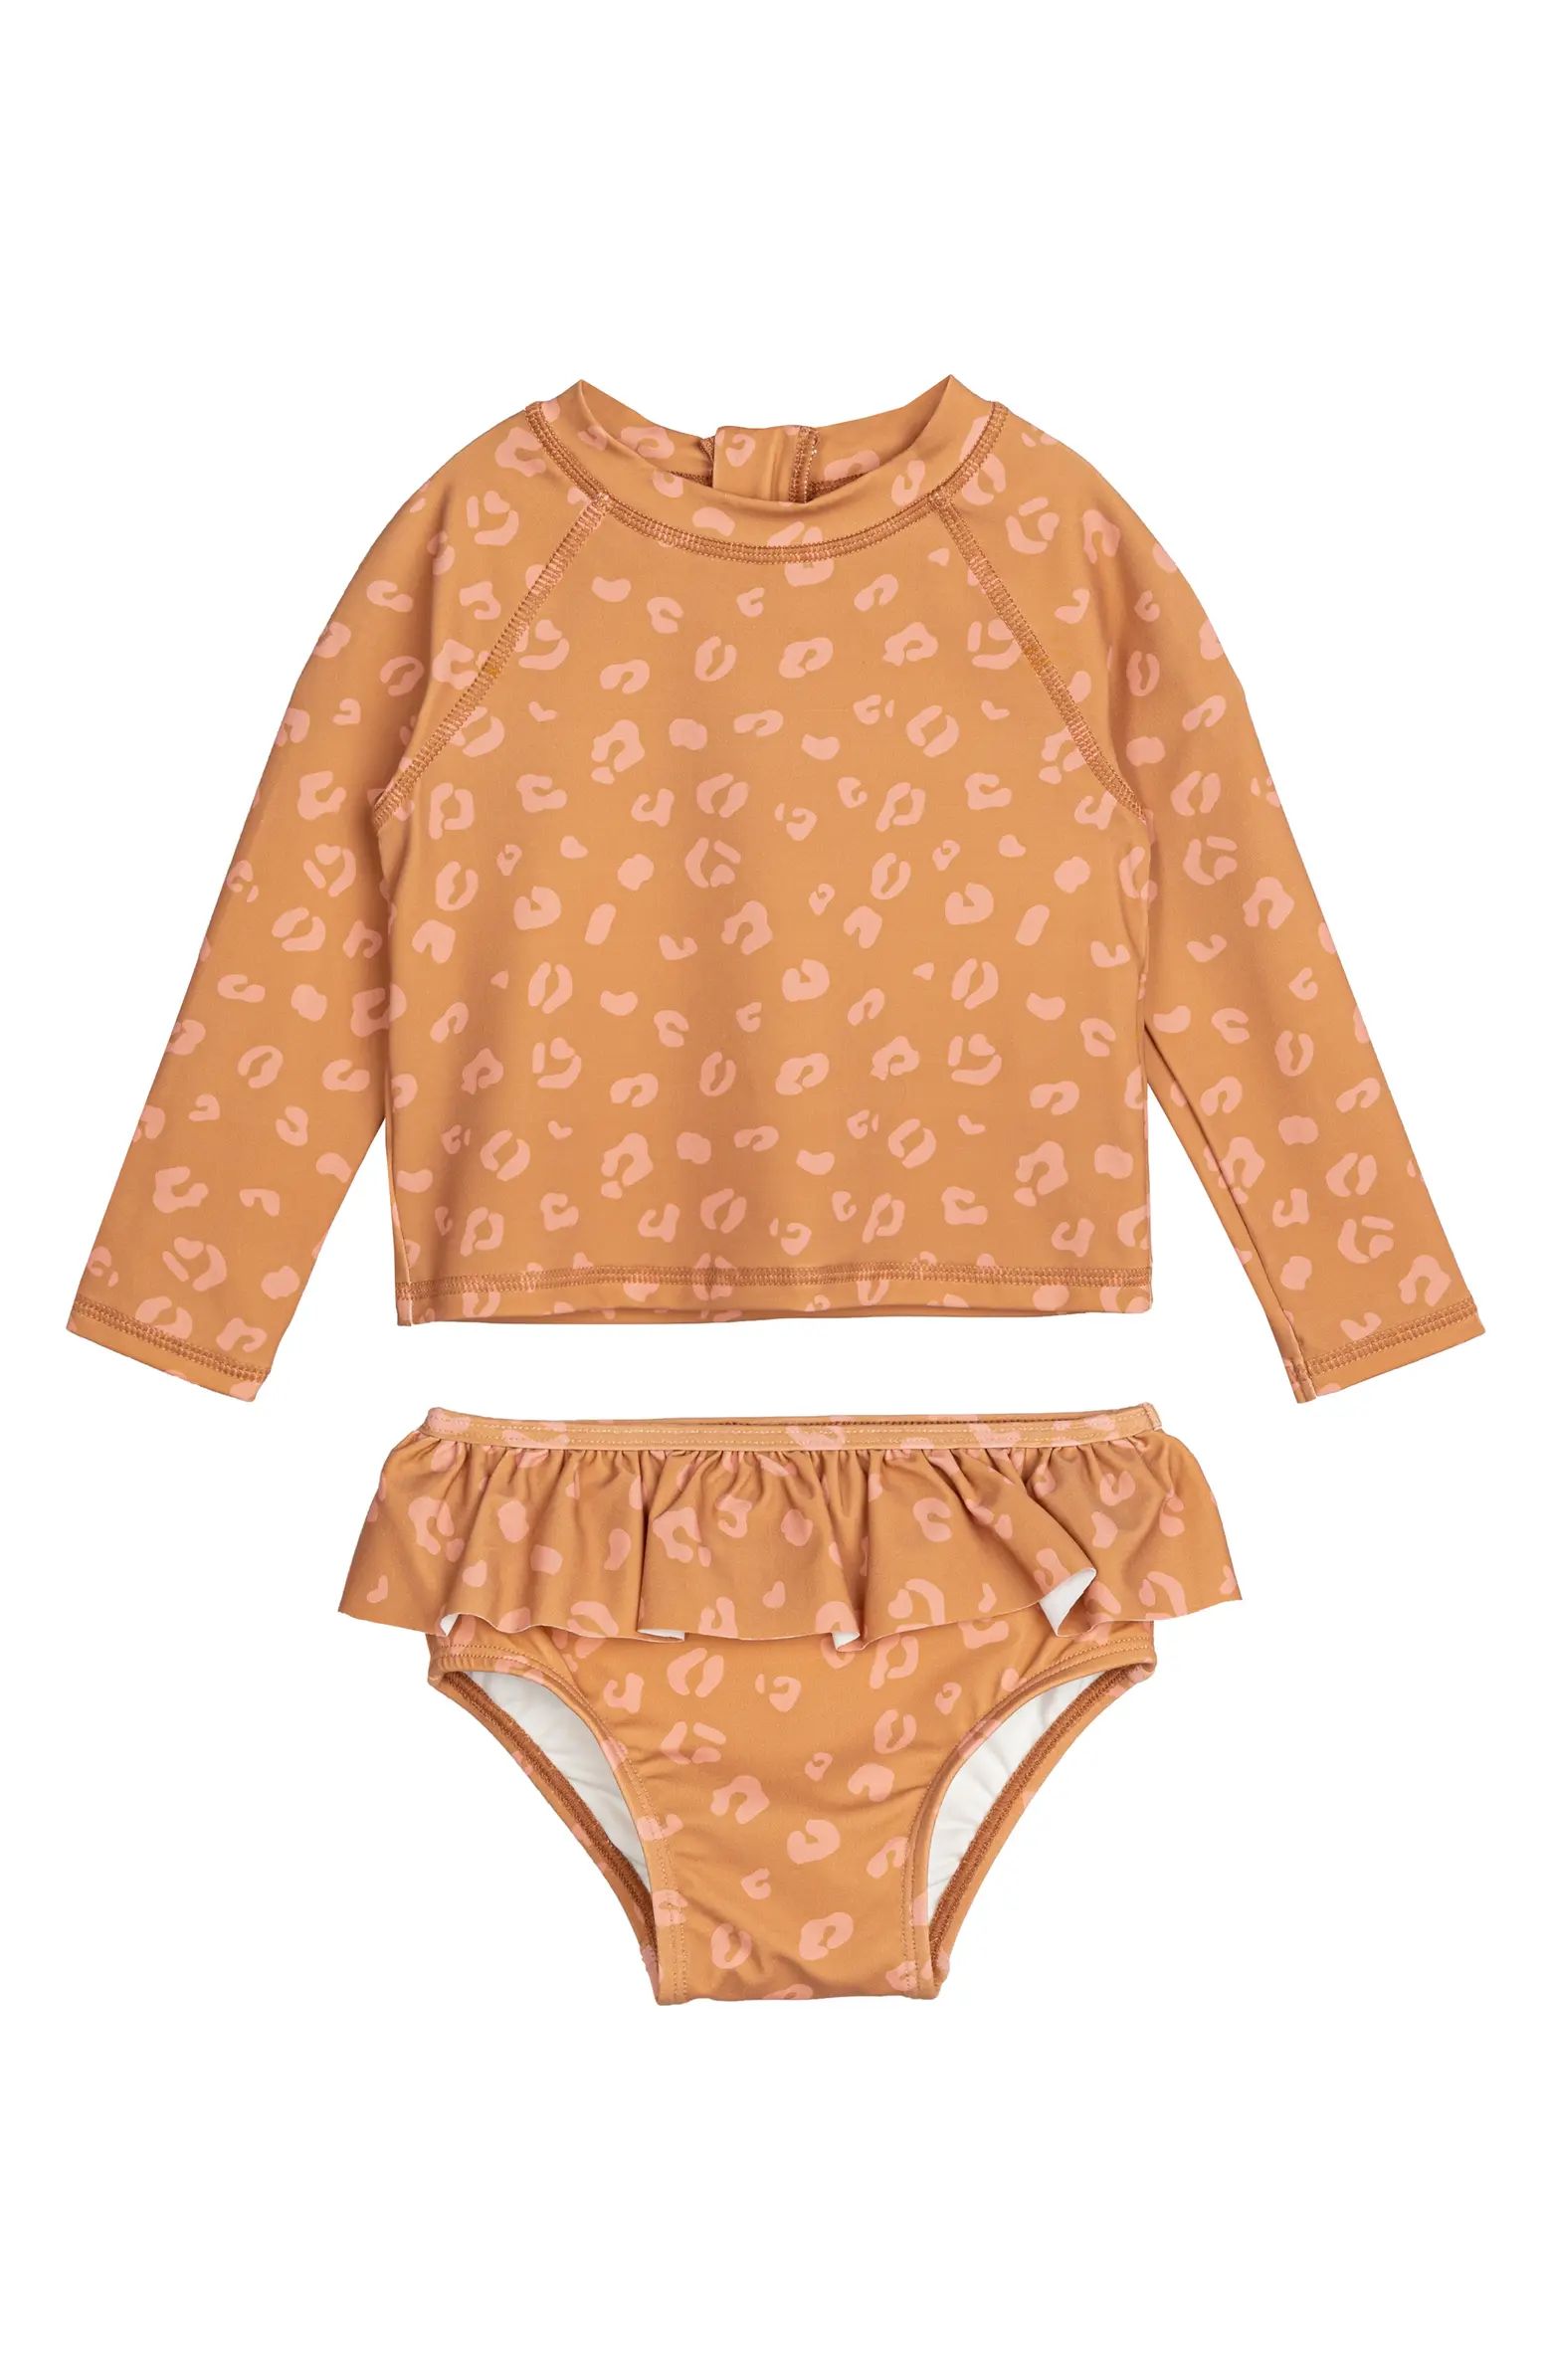 MILES THE LABEL Animal Print Long Sleeve Two-Piece Rashguard Swimsuit | Nordstrom | Nordstrom